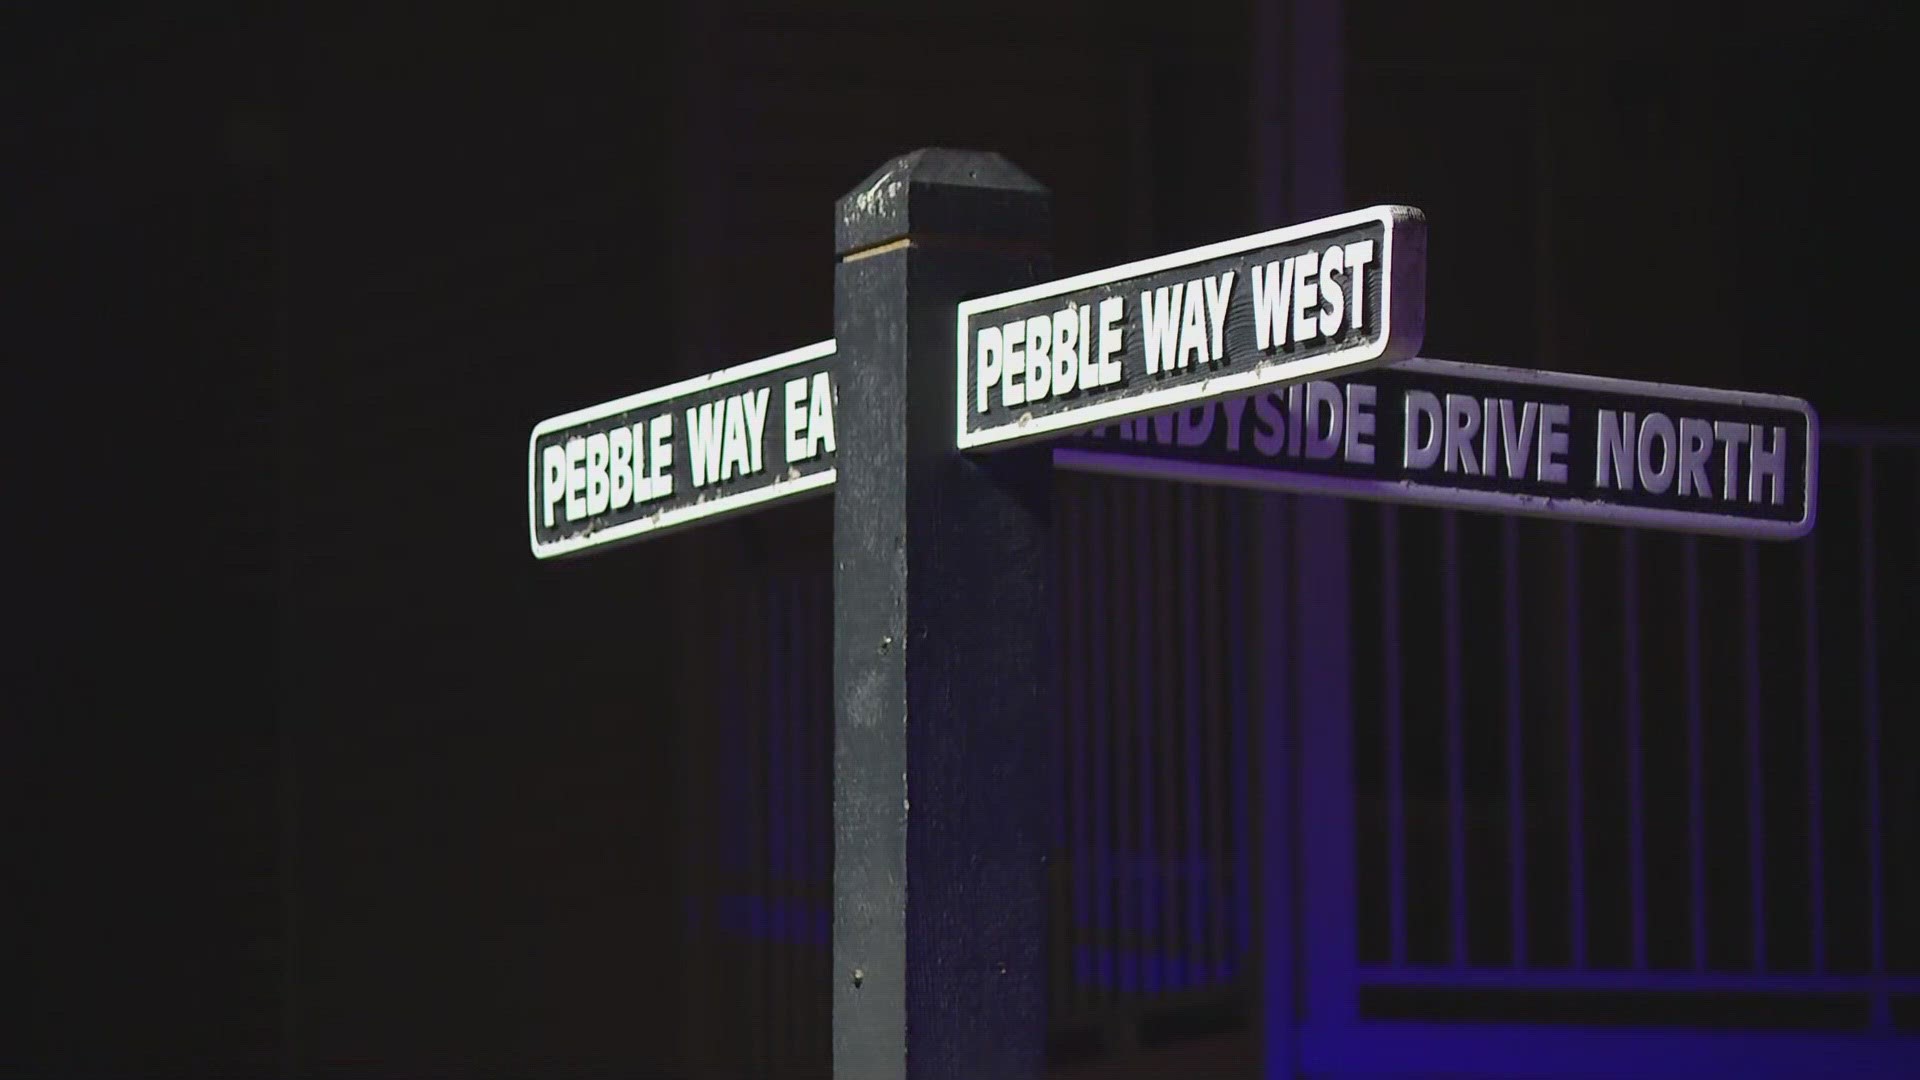 The incident happened around 9 p.m. Saturday in the 4800 block of Pebble Way, near West 62nd Street and Georgetown Road.